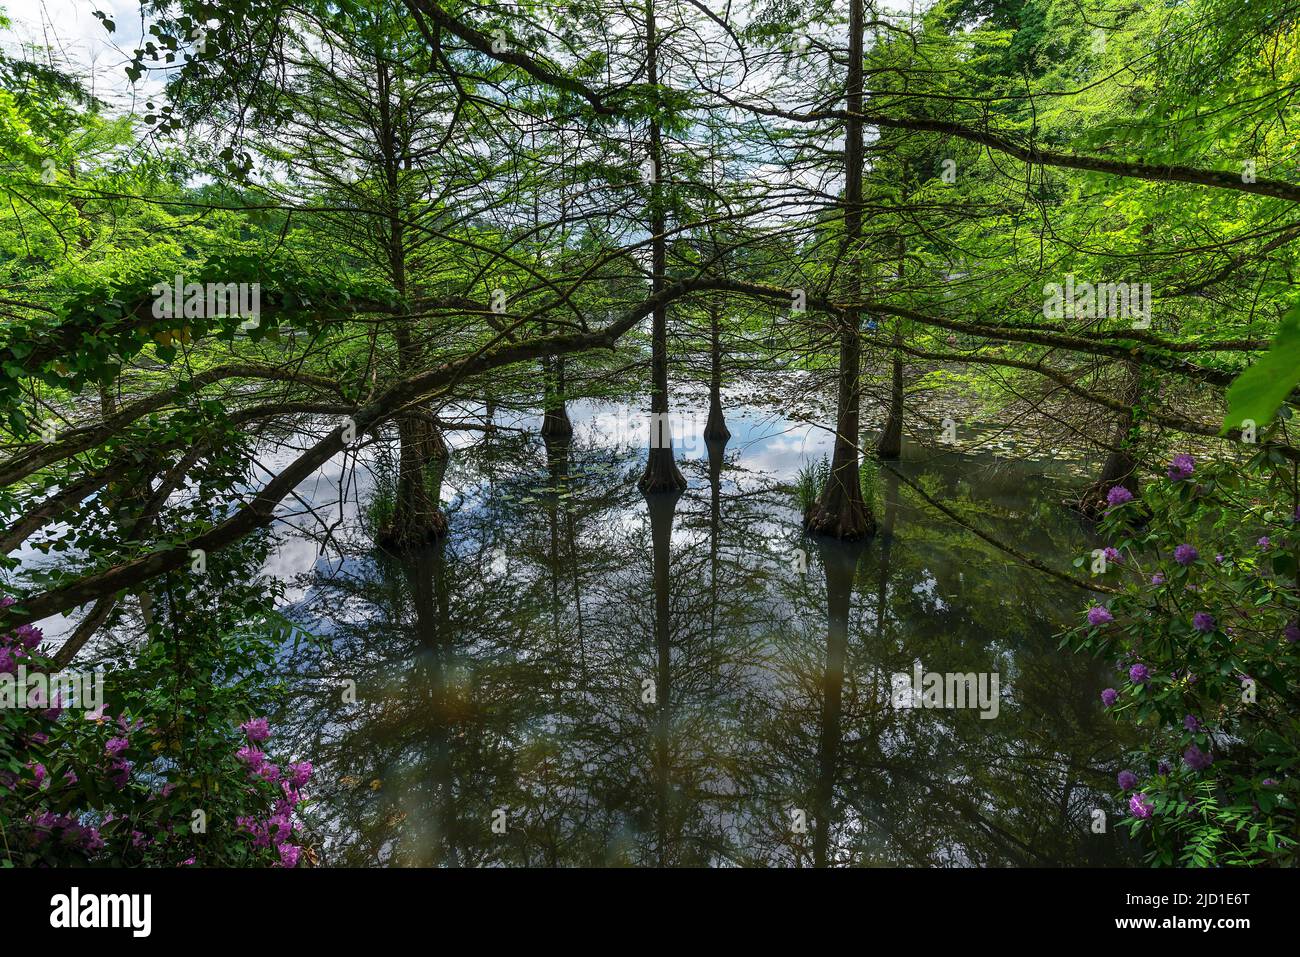 Bald cypress (Taxodium distichum) in the water, Dennenlohe Castle Park, Middle Franconia Bavaria, Germany Stock Photo